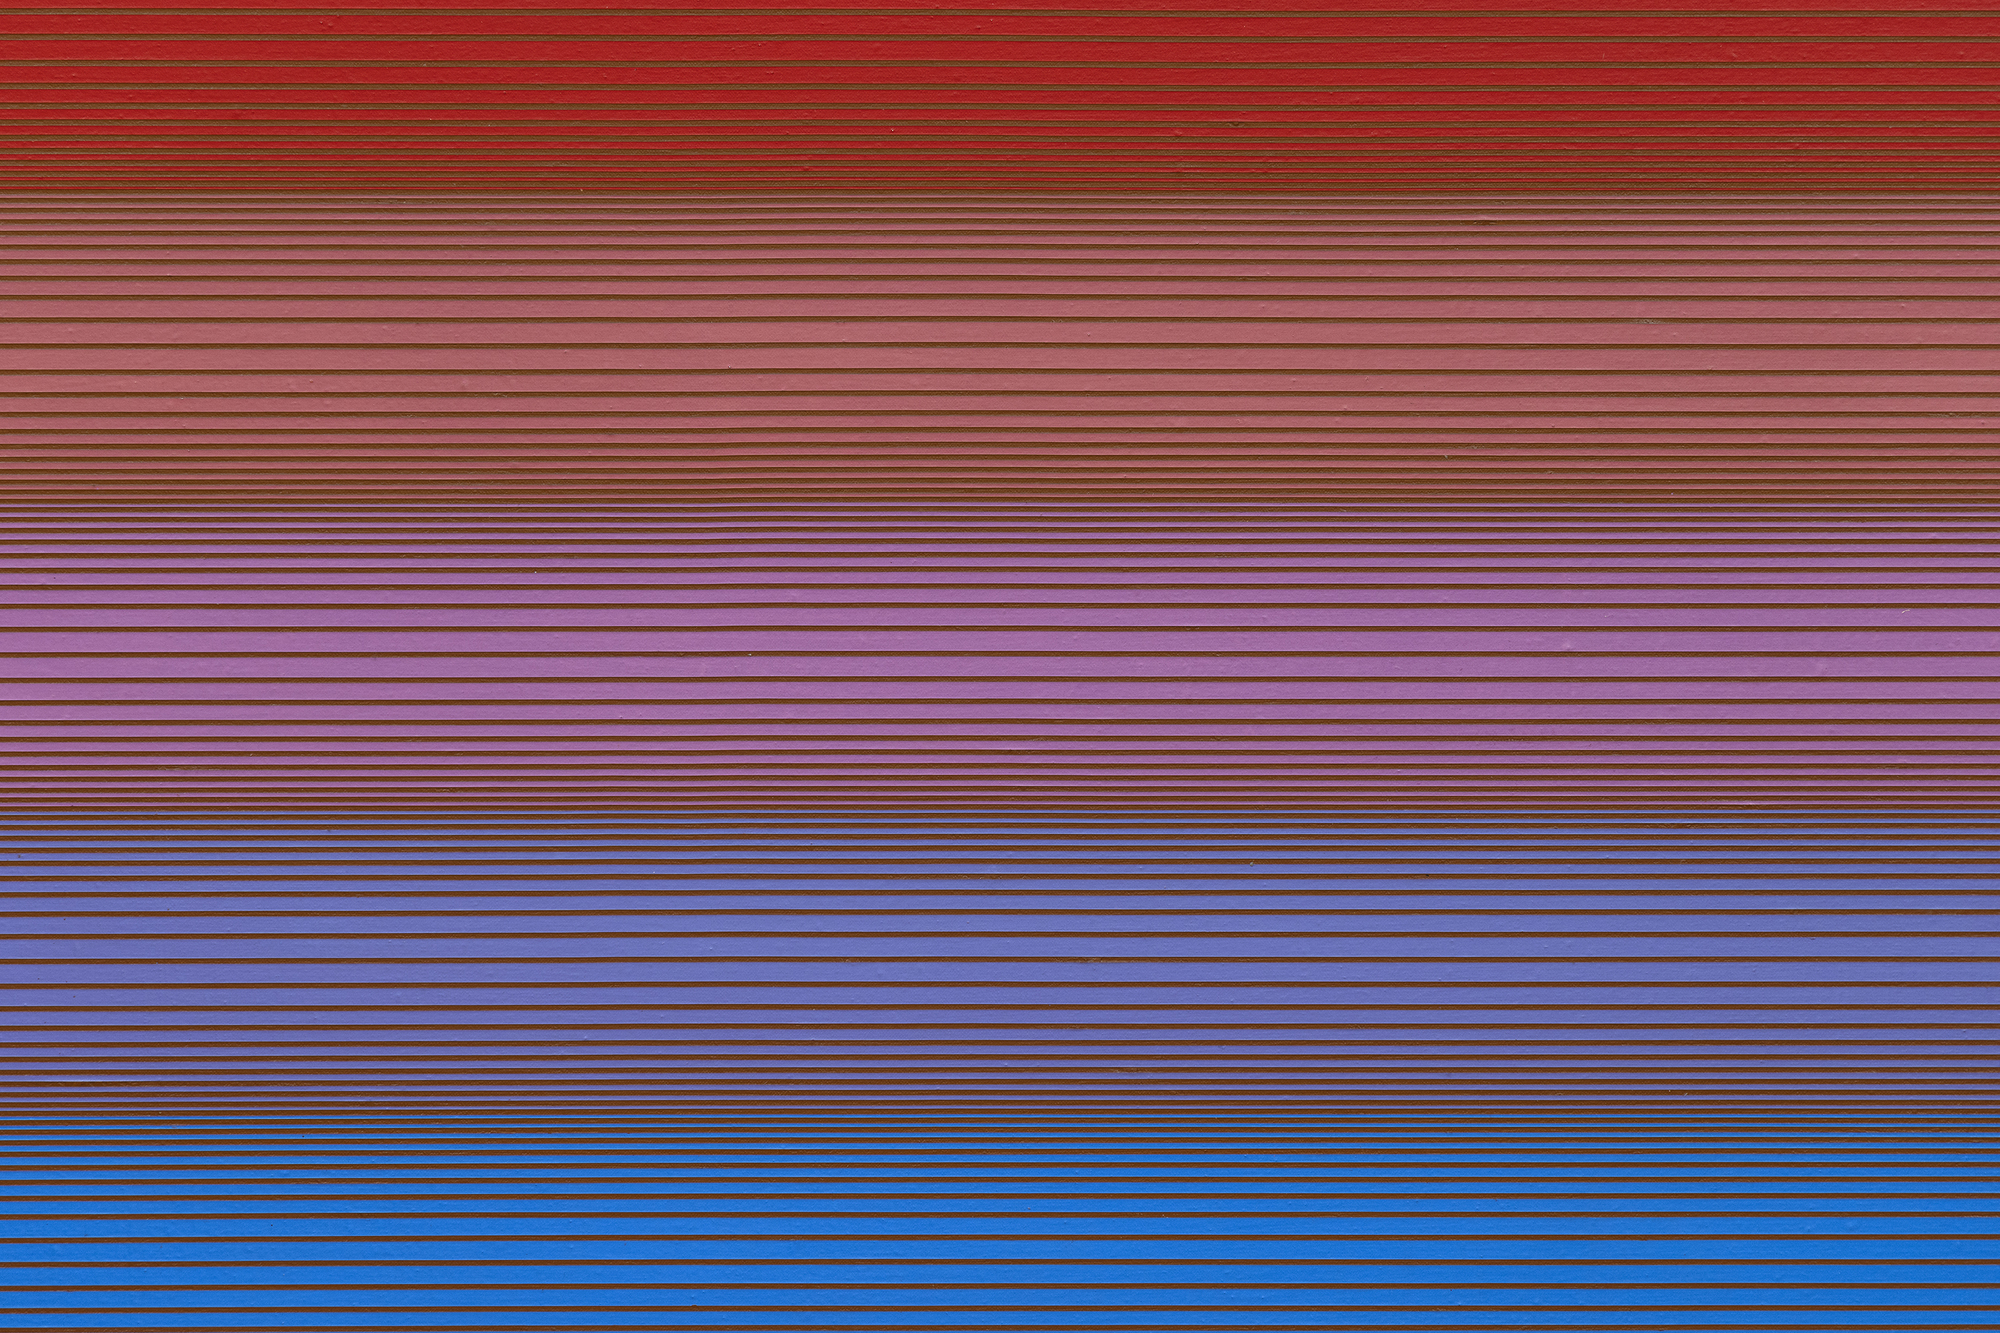 In 1970, Anuszkiewicz began the series Portals, a series of paintings consisting of upright rectangles formed from soft colors with vertical lines breaking up the color field and framing central, luminous rectangles. The orientation of "Blueing", however, presents an opportunity to recalibrate the artist's usual verticality of the Portal series, suggestive of transcendence, and transpose it to a horizontal plane implying connection rather than ascension. In the spirit of perceptual experimentation, the portal here, red, vividly set within the softer surrounding bands of color, provides a stronger contrast than usual and serves as a focal point anchoring the composition. An uncommon, if not unique, horizontal painting in the Portals series, "Blueing" underscores the complex interplay between an artist's intention, formal composition, and viewer perception. It engages us in a vibrant dialogue between the realms of the abstract and the visceral, encouraging a personal and immersive encounter.